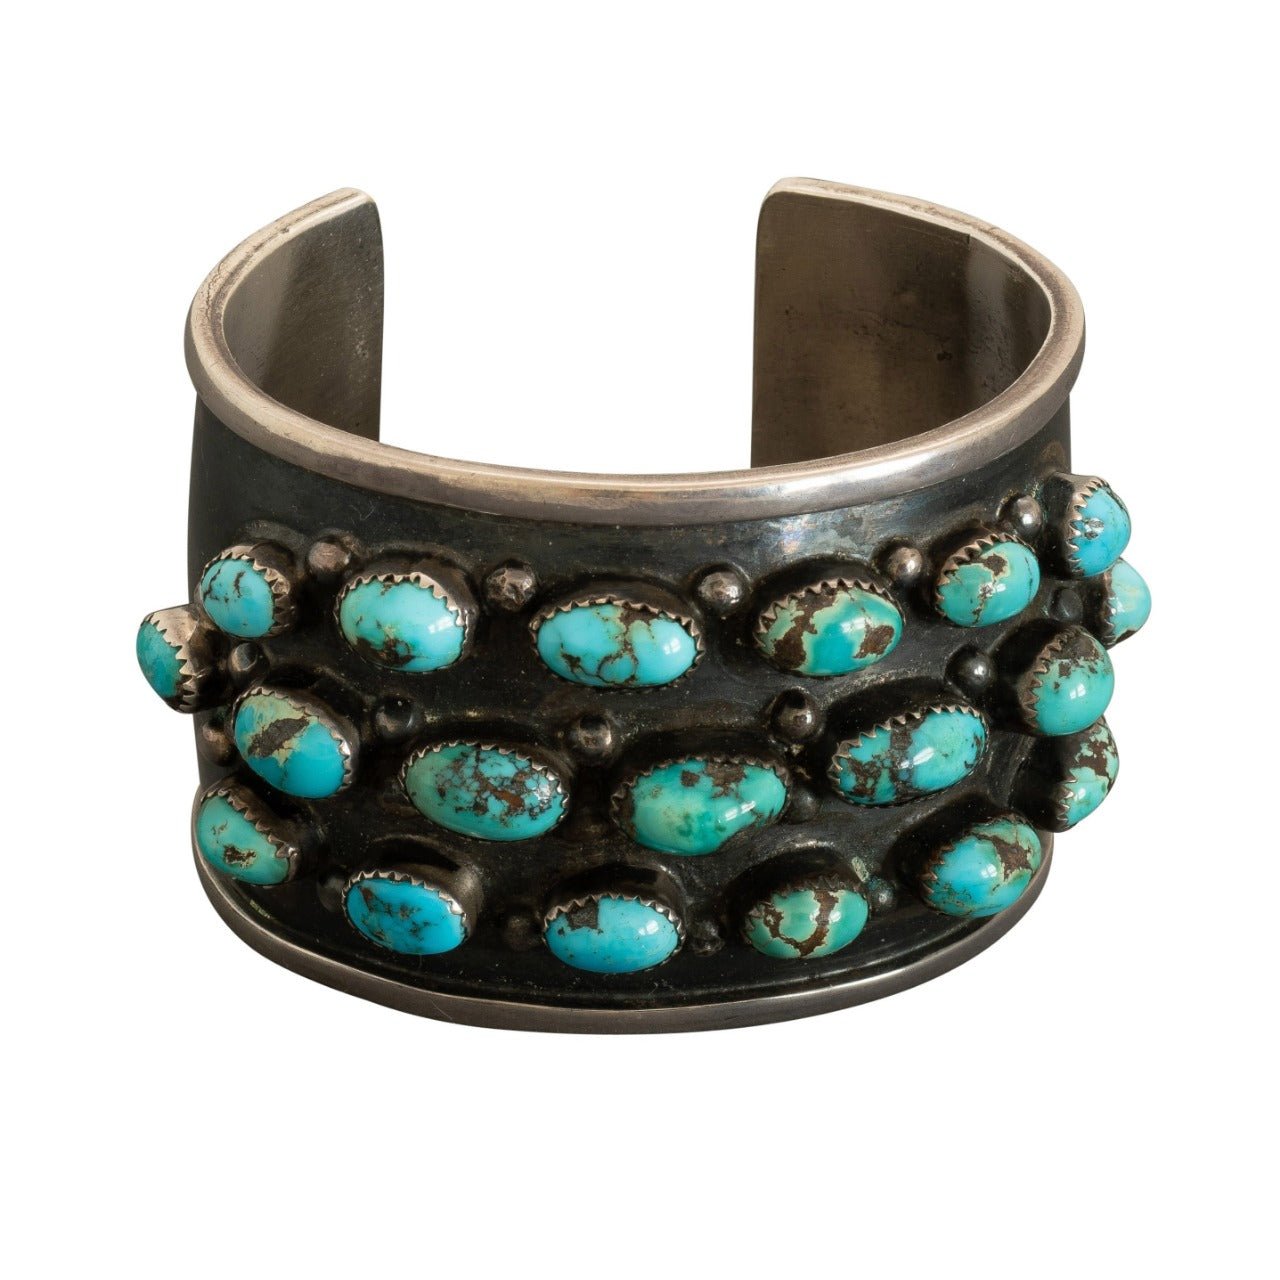 Vintage Wide Turquoise Cuff Of Multiple Stones in Sterling Silver - Turquoise & Tufa